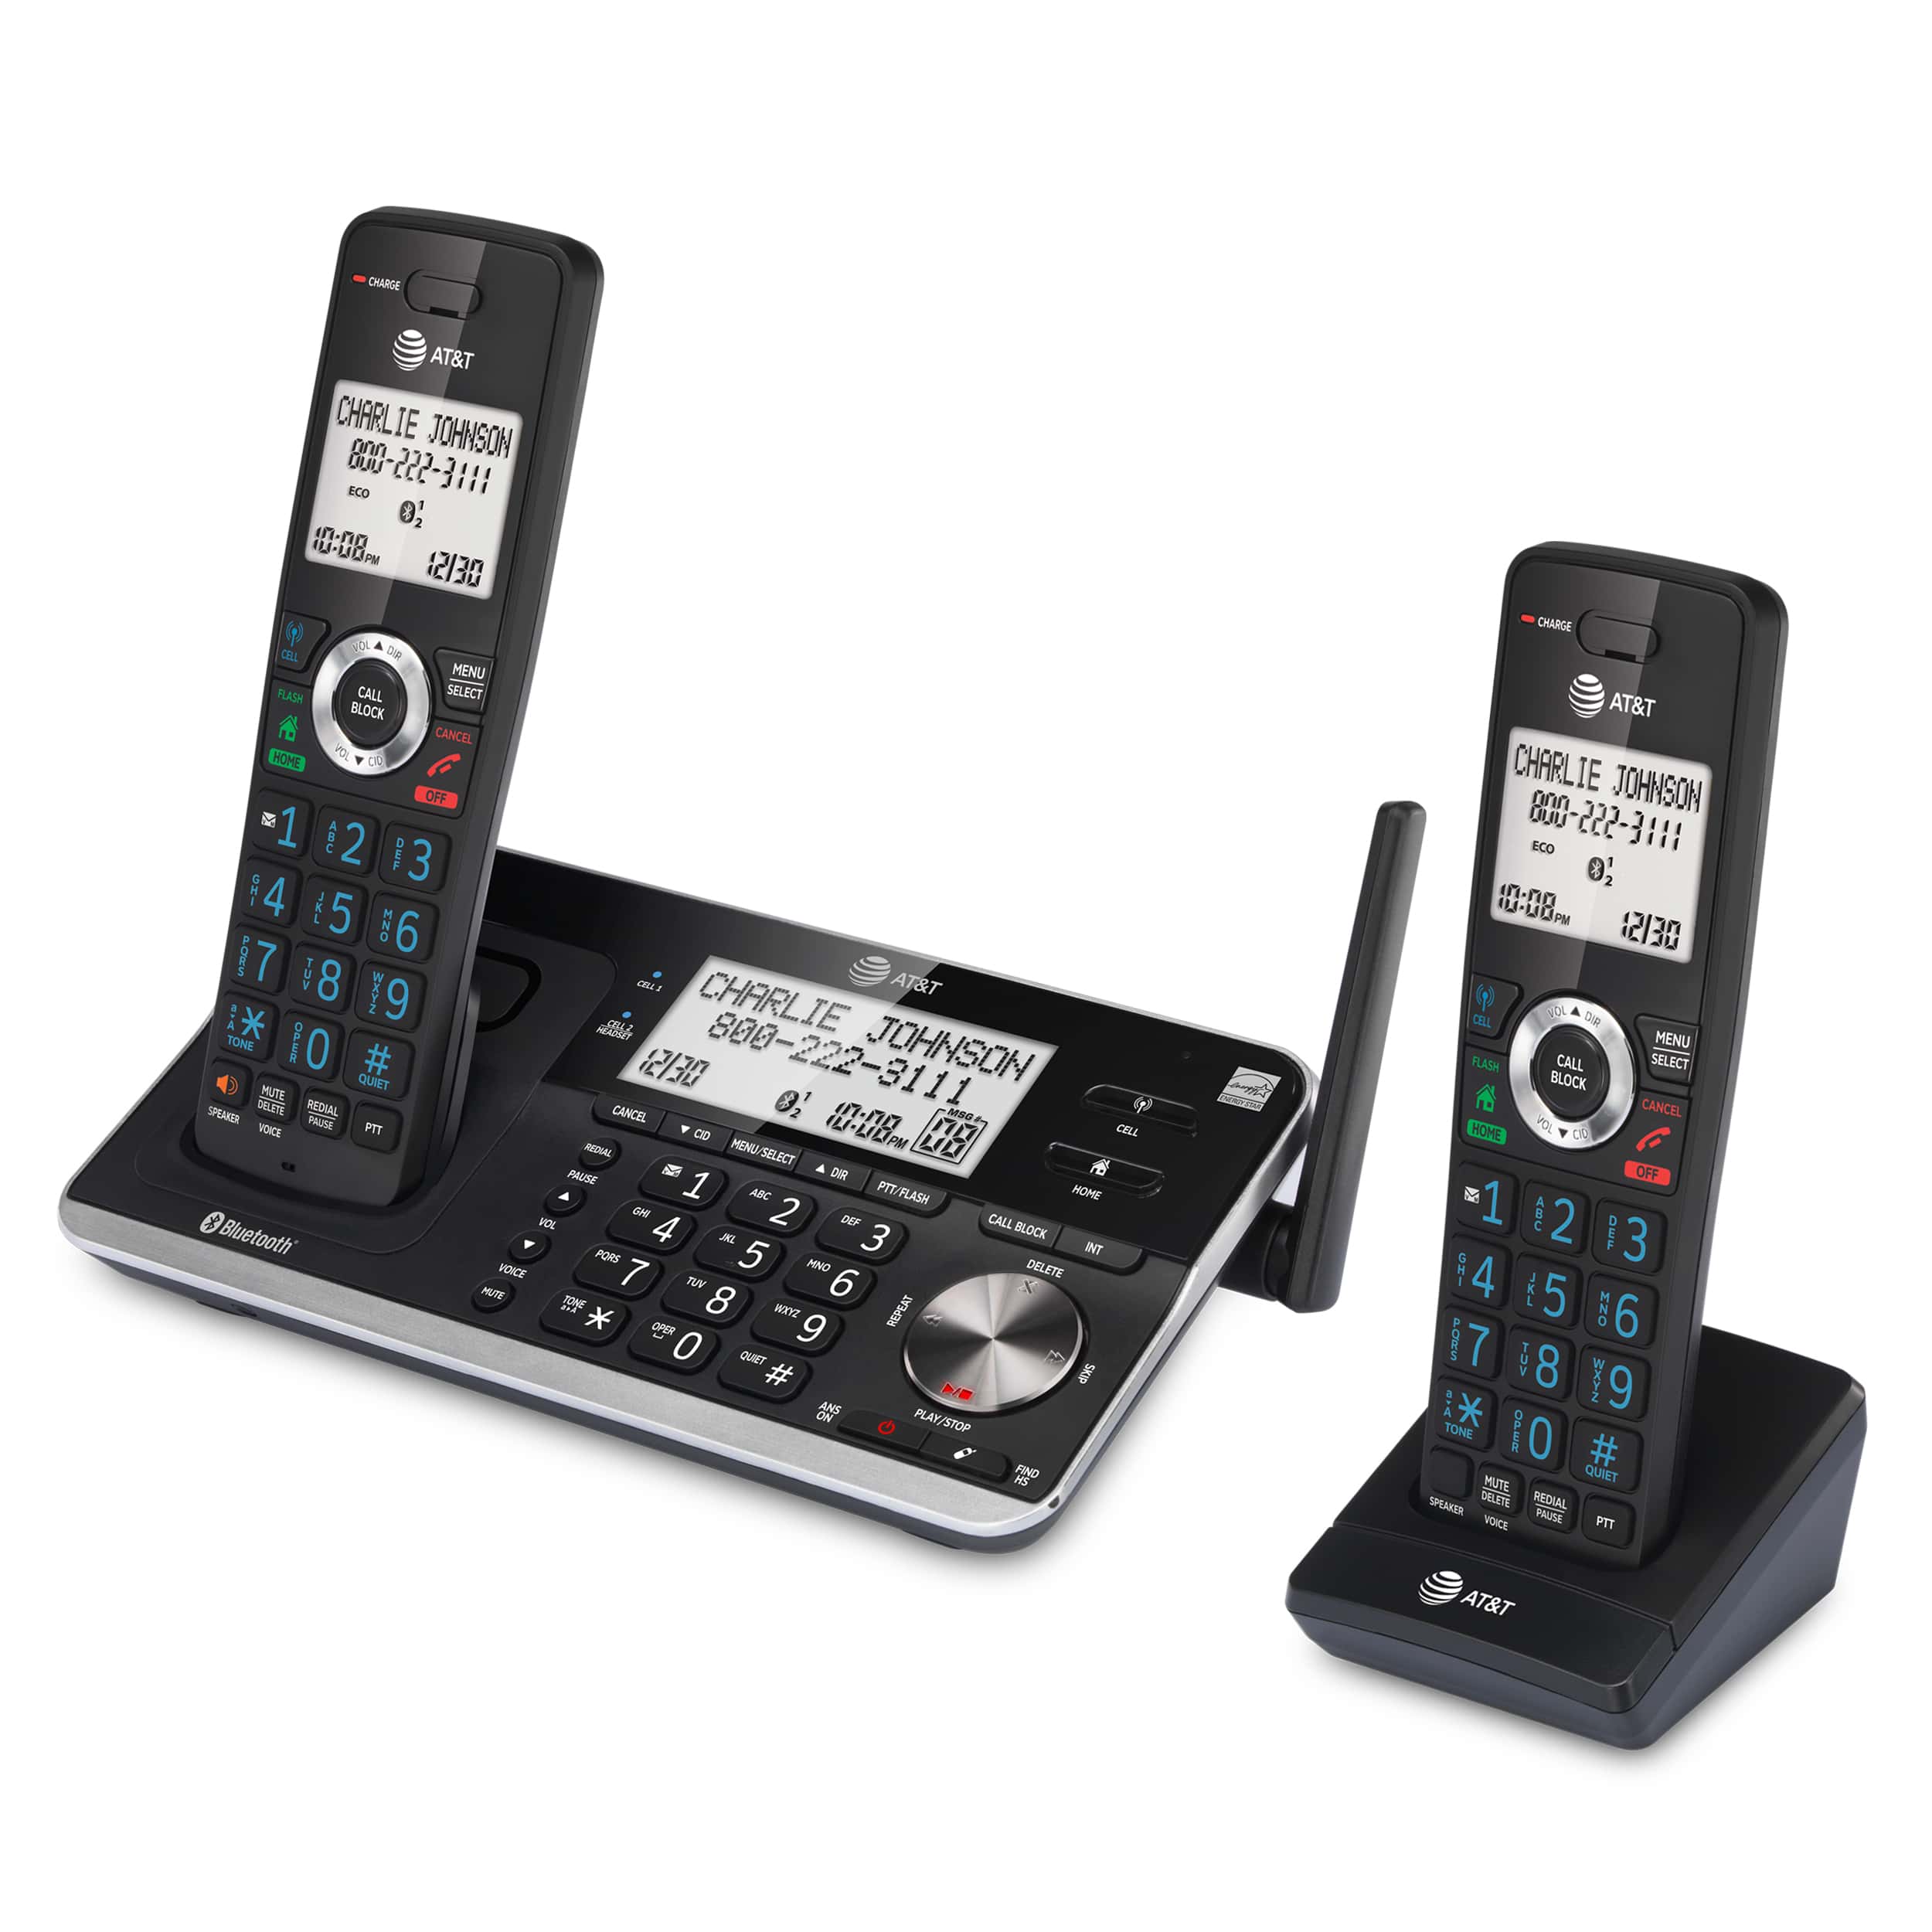 2-Handset Expandable Cordless Phone with Unsurpassed Range, Bluetooth Connect to Cell™, Smart Call Blocker and Answering System, DLP73210 - view 1